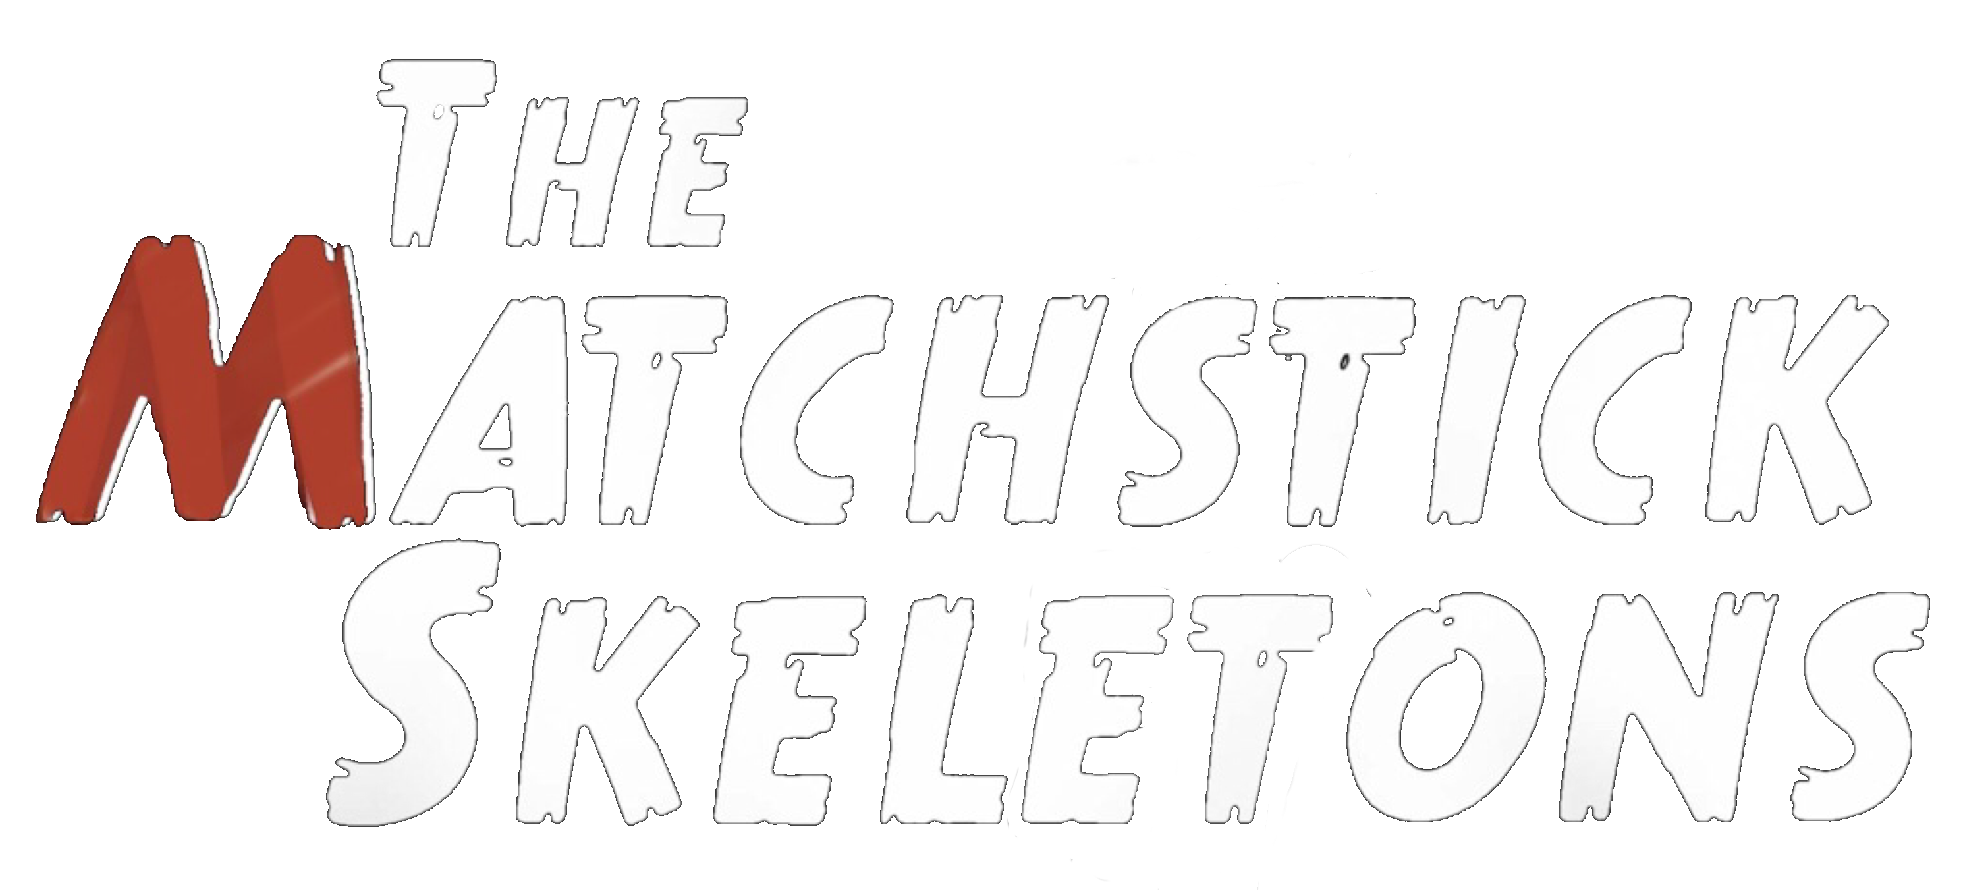 The Matchstick Skeletons